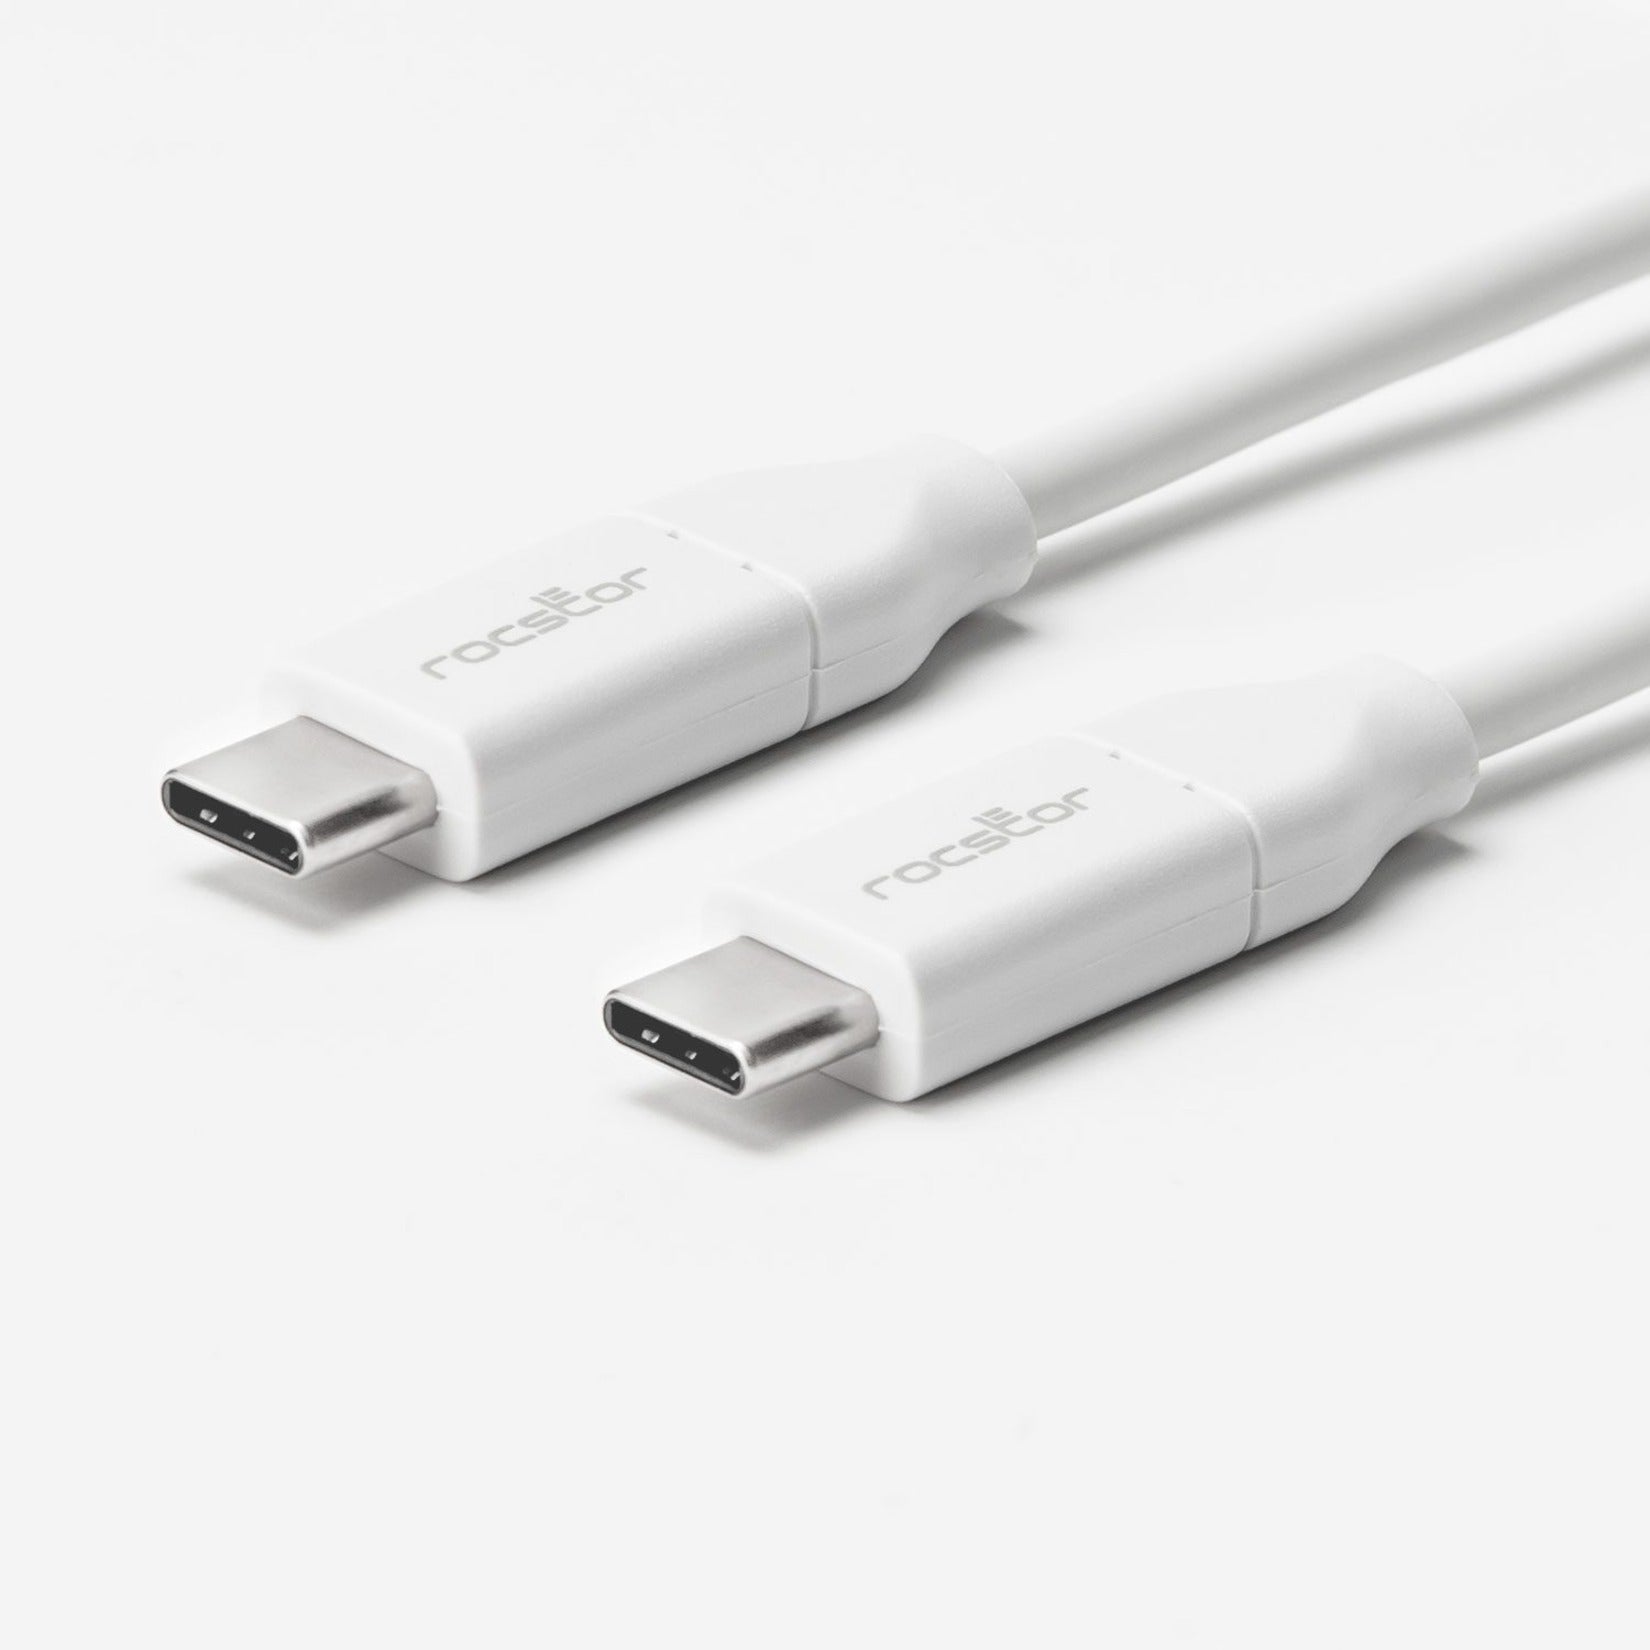 Rocstor Y10C272-W1 Premium USB-C Charging Cable Up to 100W Power Delivery, Fast Charging, EMI Protection